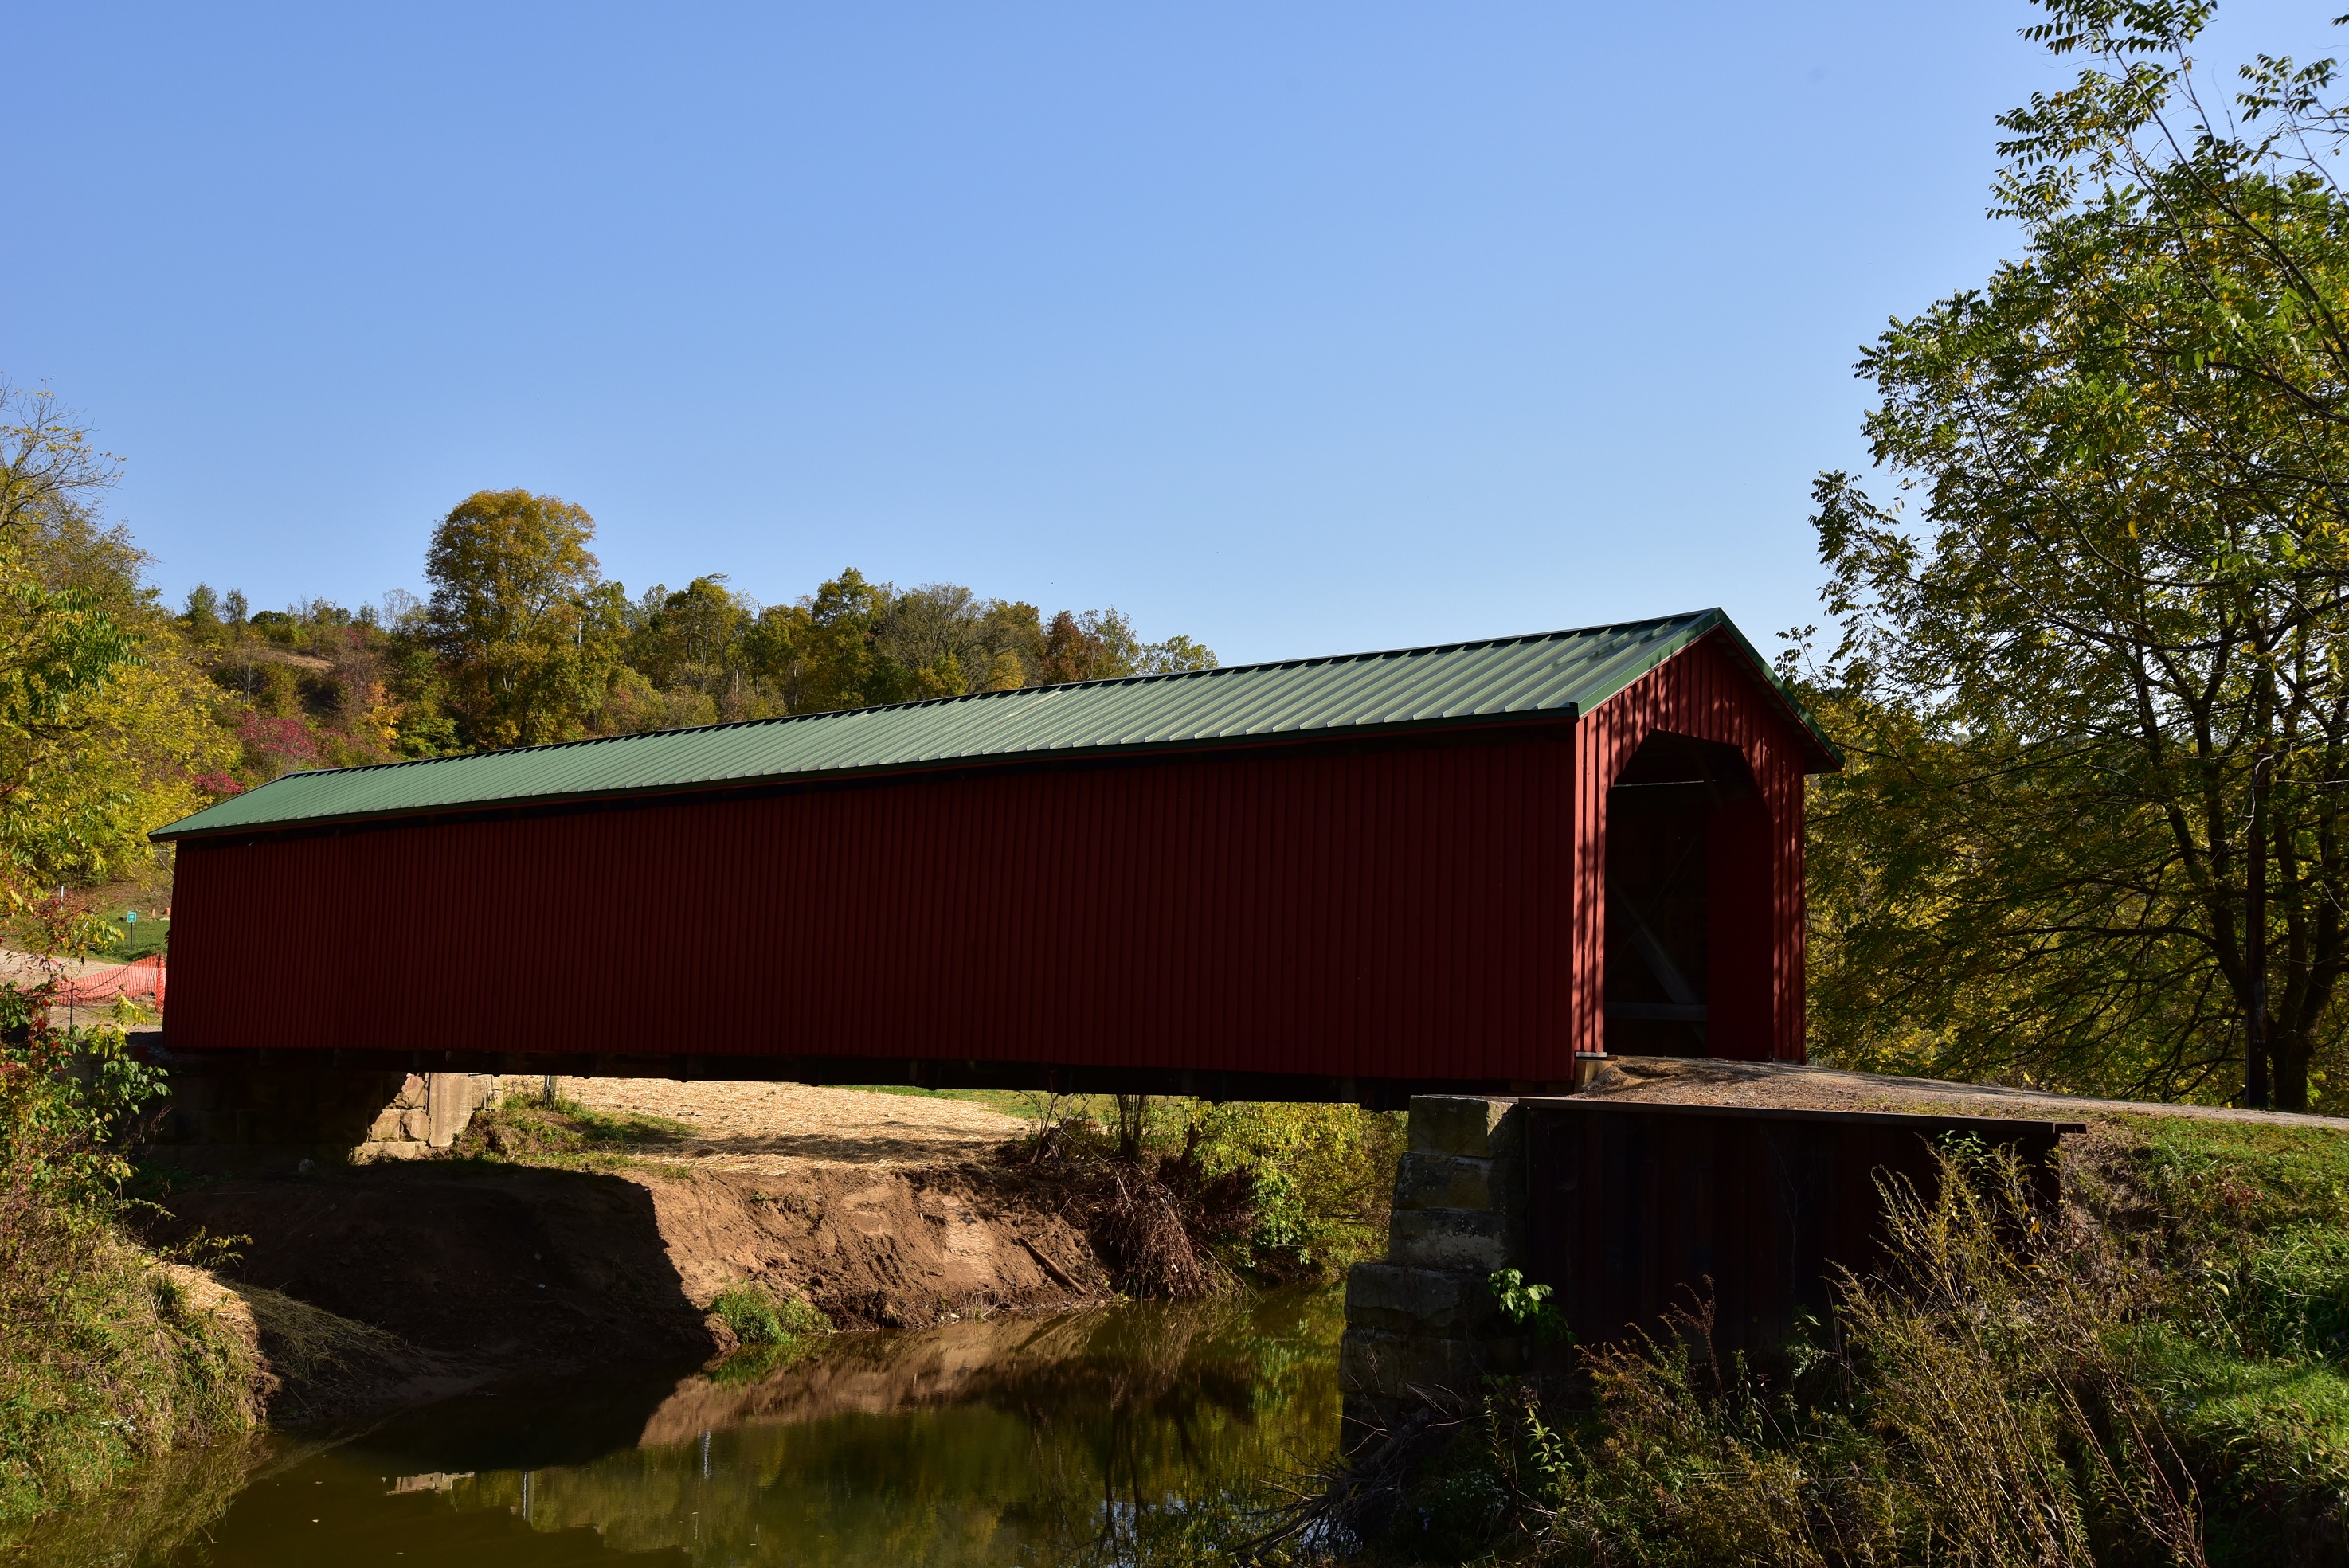 Monroe County, Woolpert and The Righter Co. were honored for their rehabilitation and preservation efforts on the Foraker Covered Bridge.